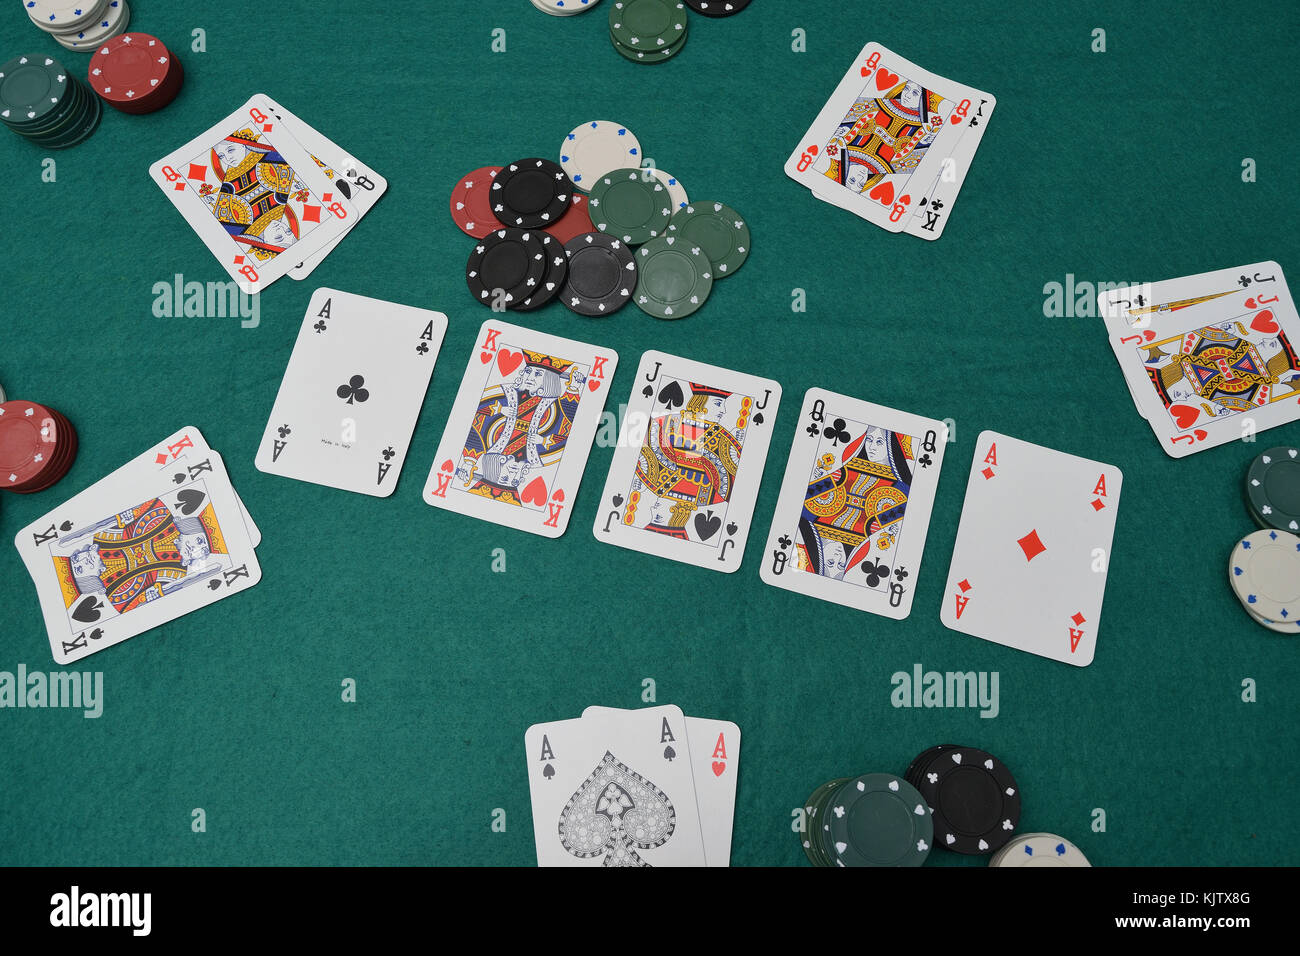 chips and cards on a gambling table with chips Stock Photo